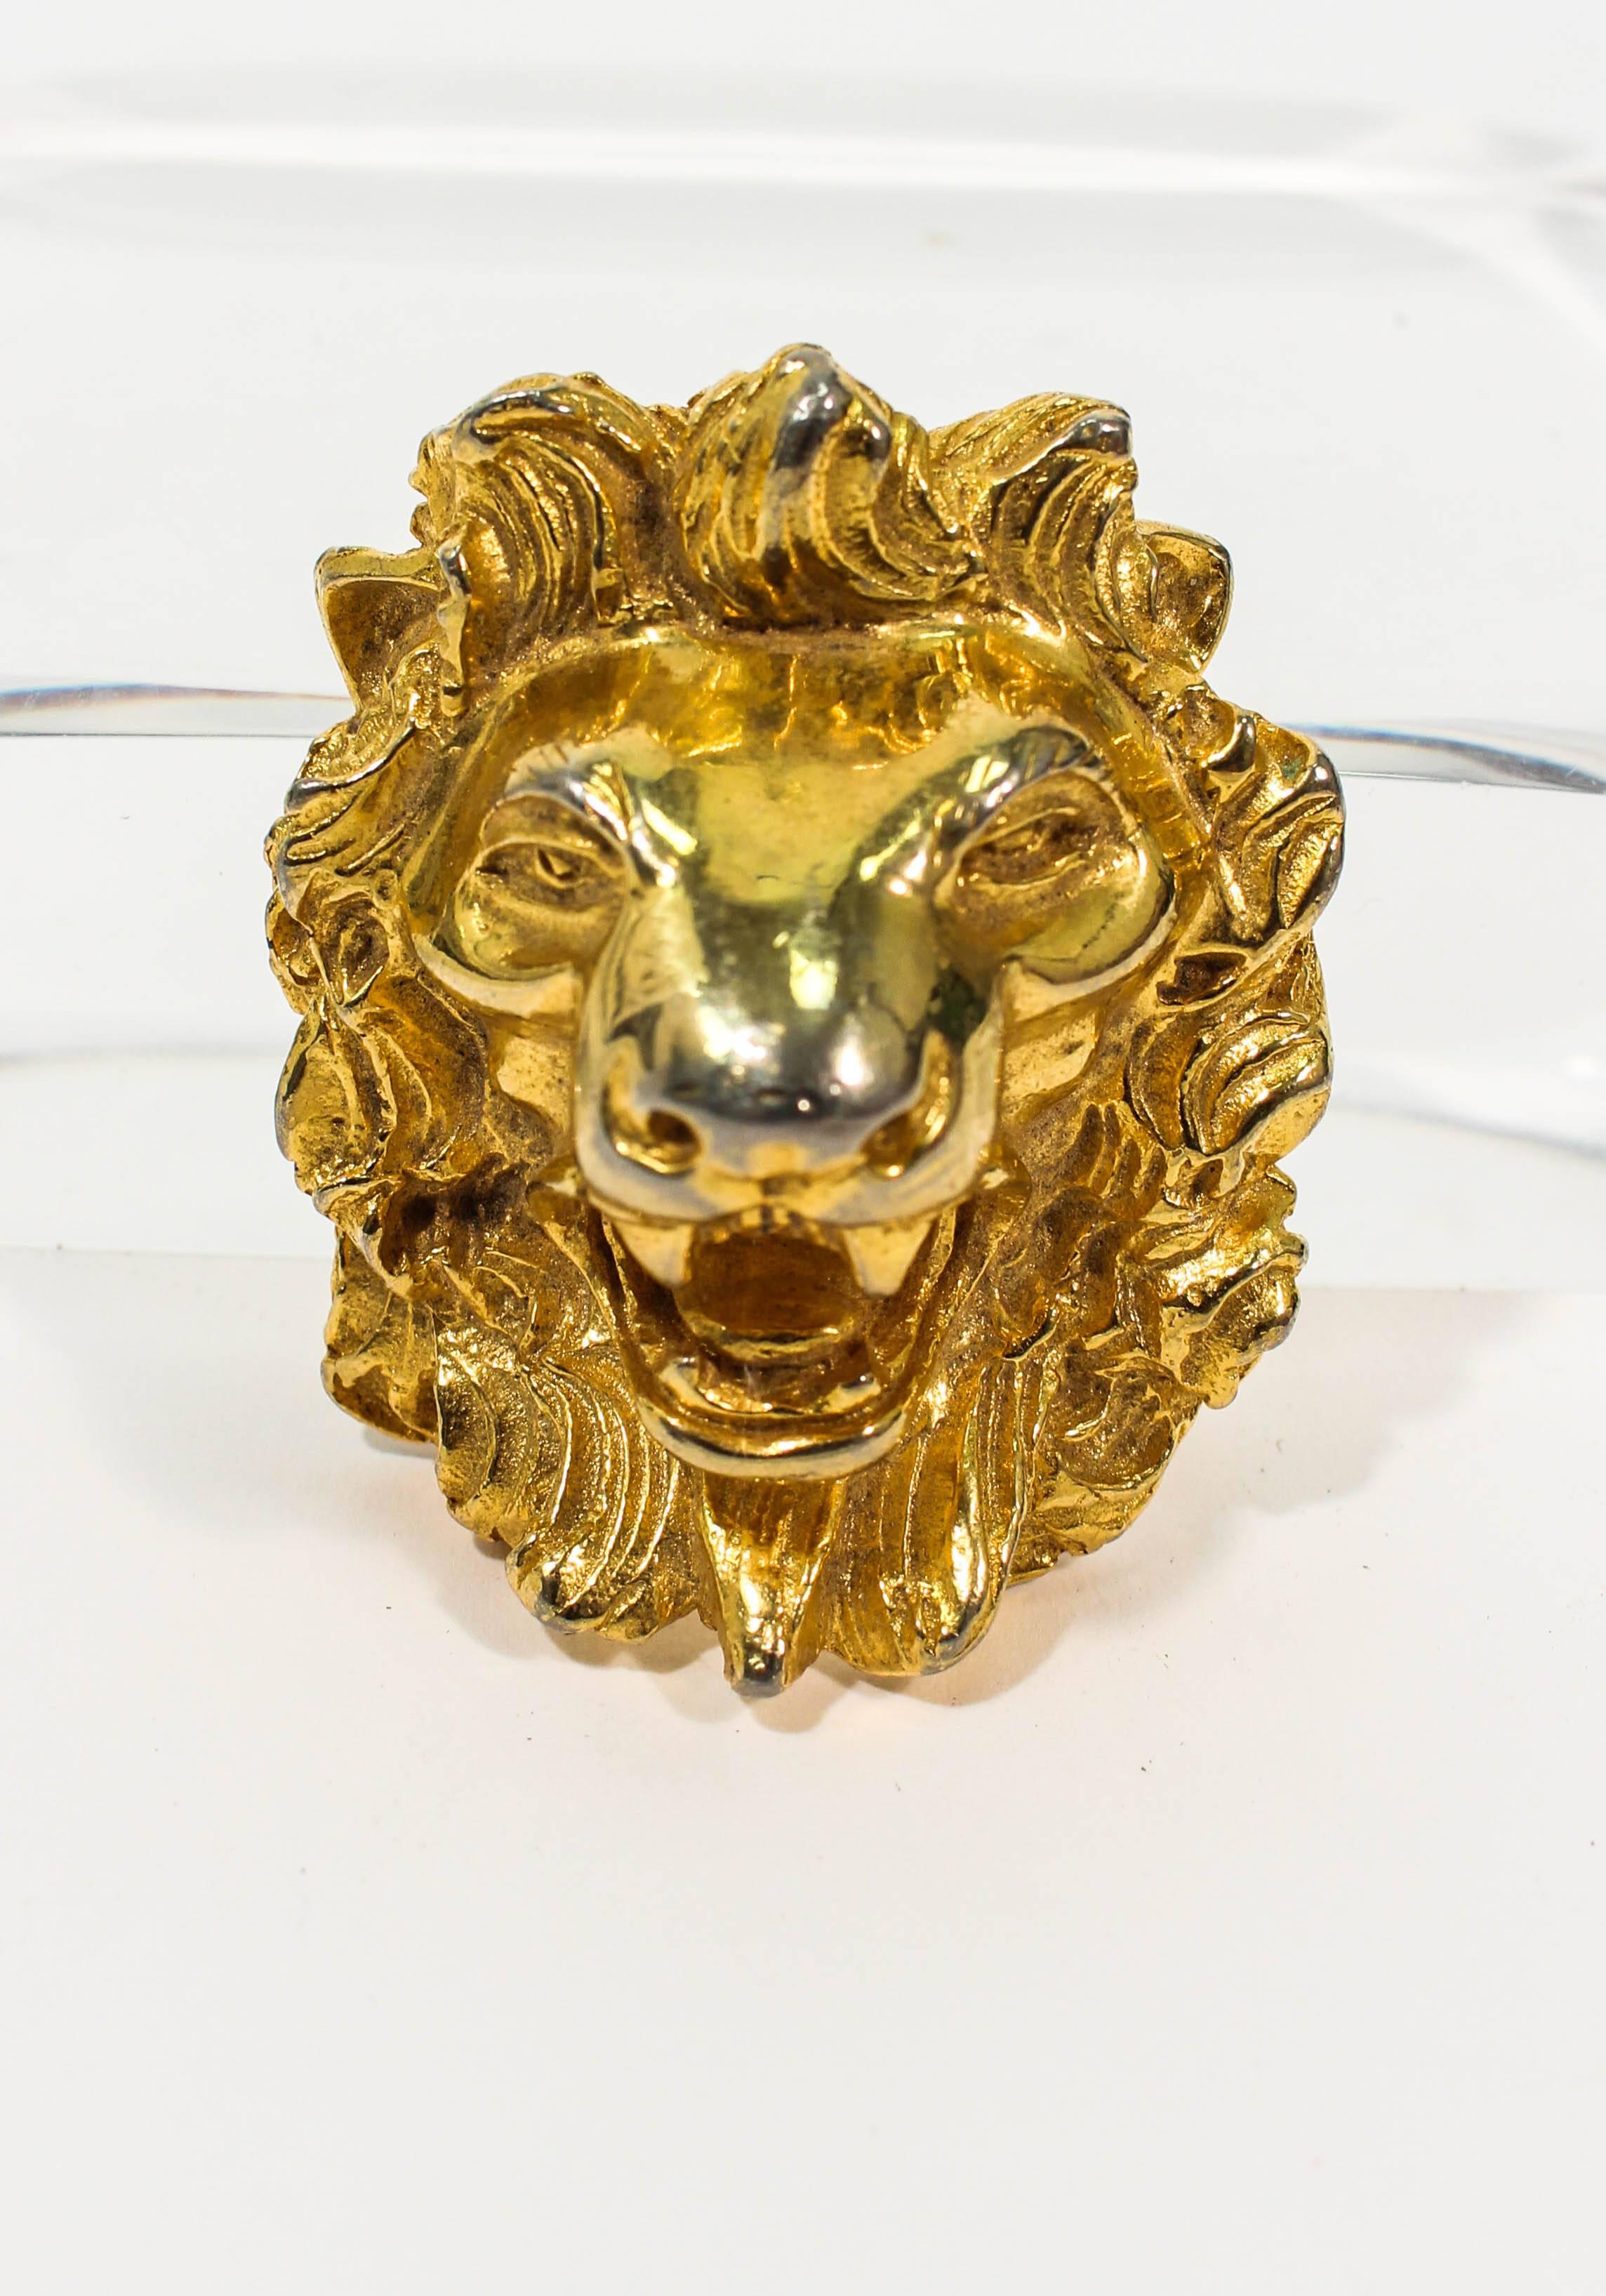 This Judith Leiber brooch is composed of a gold hue metal and can be worn as a pendant as well. In great vintage condition, shows some signs of wear and discoloration (see photos; front mouth of lions face is faded).

**Please cross-reference